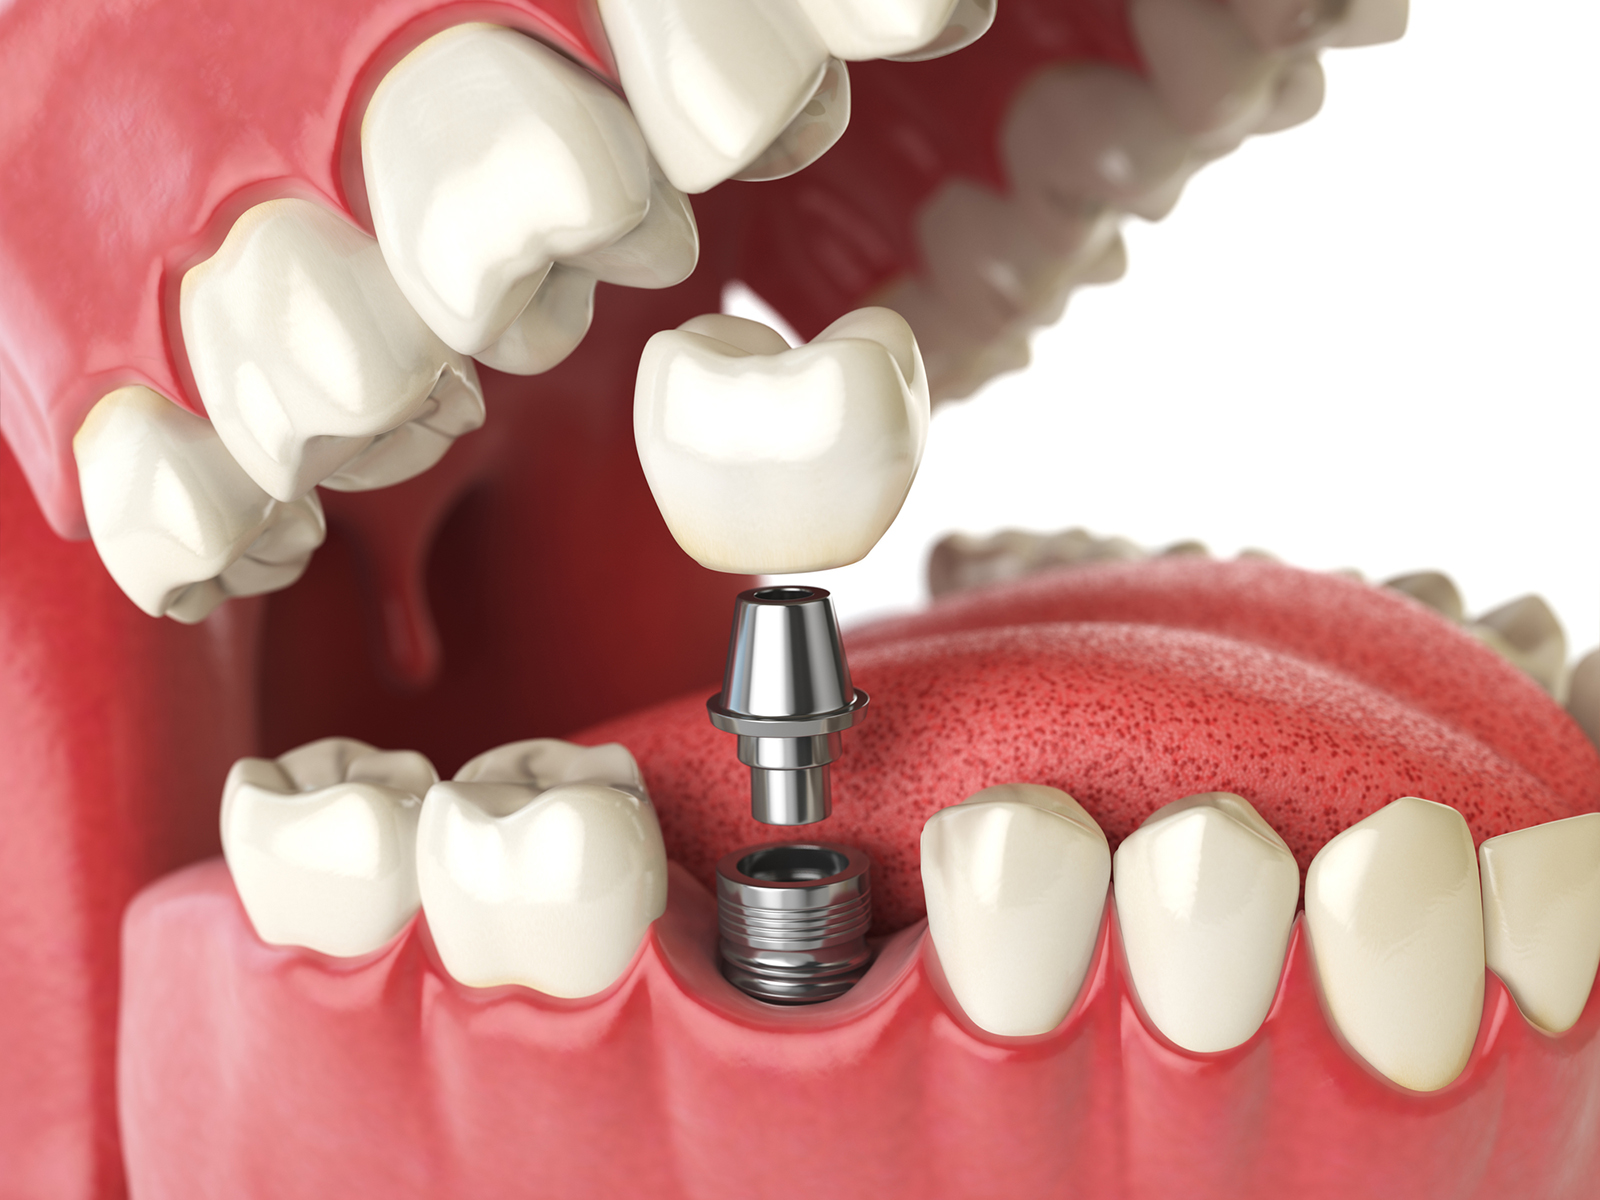 If You Have Gum Disease, Can You Get Dental Implants?